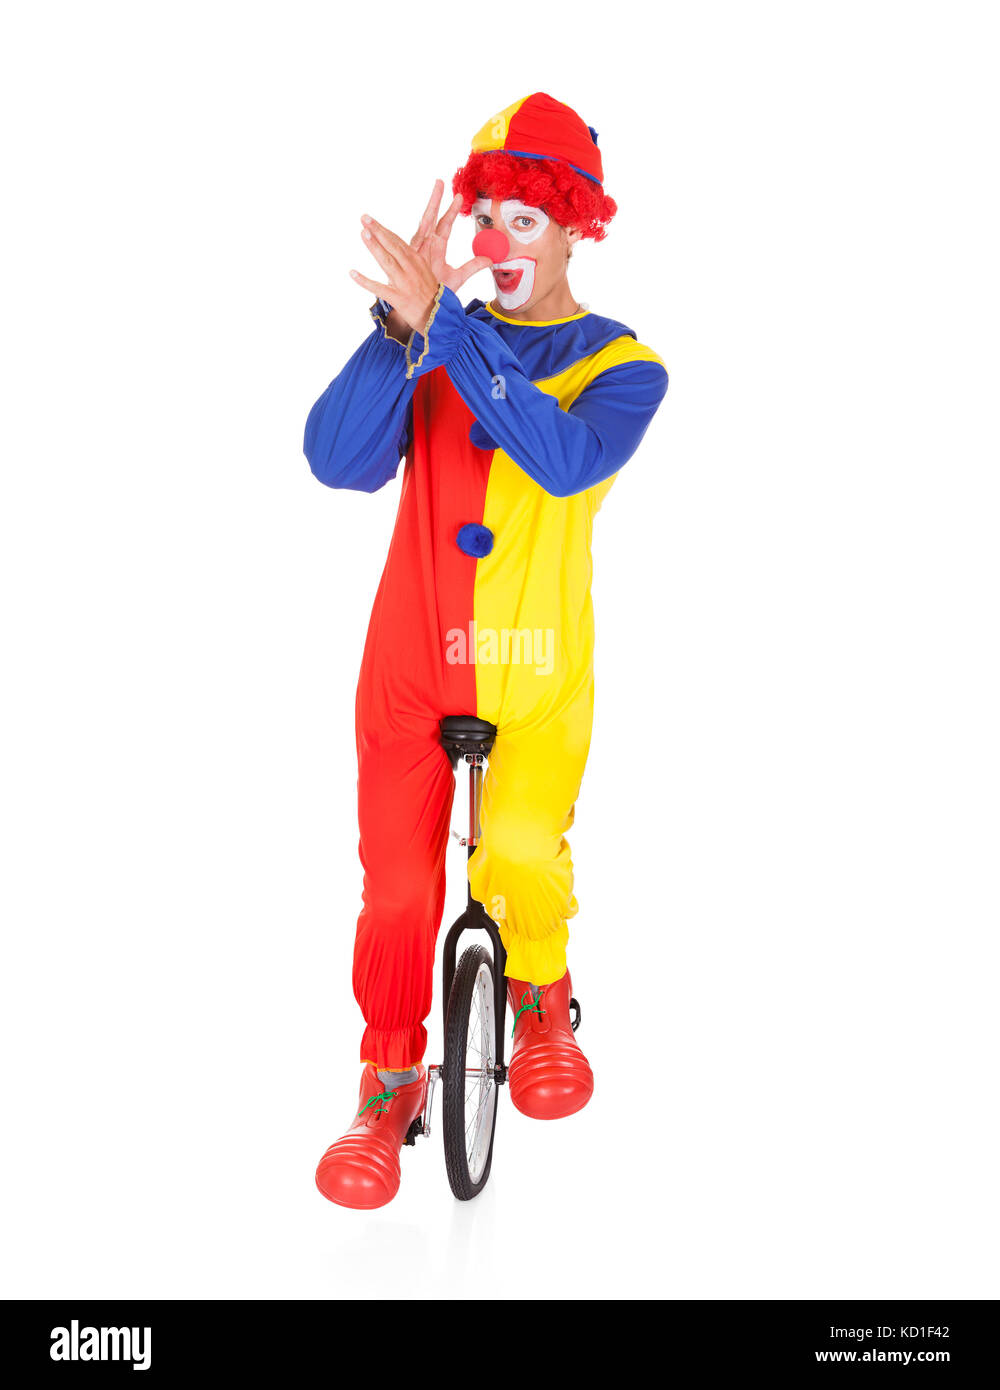 Portrait Of A Funny Clown Performing On Unicycle Over White Background Stock Photo